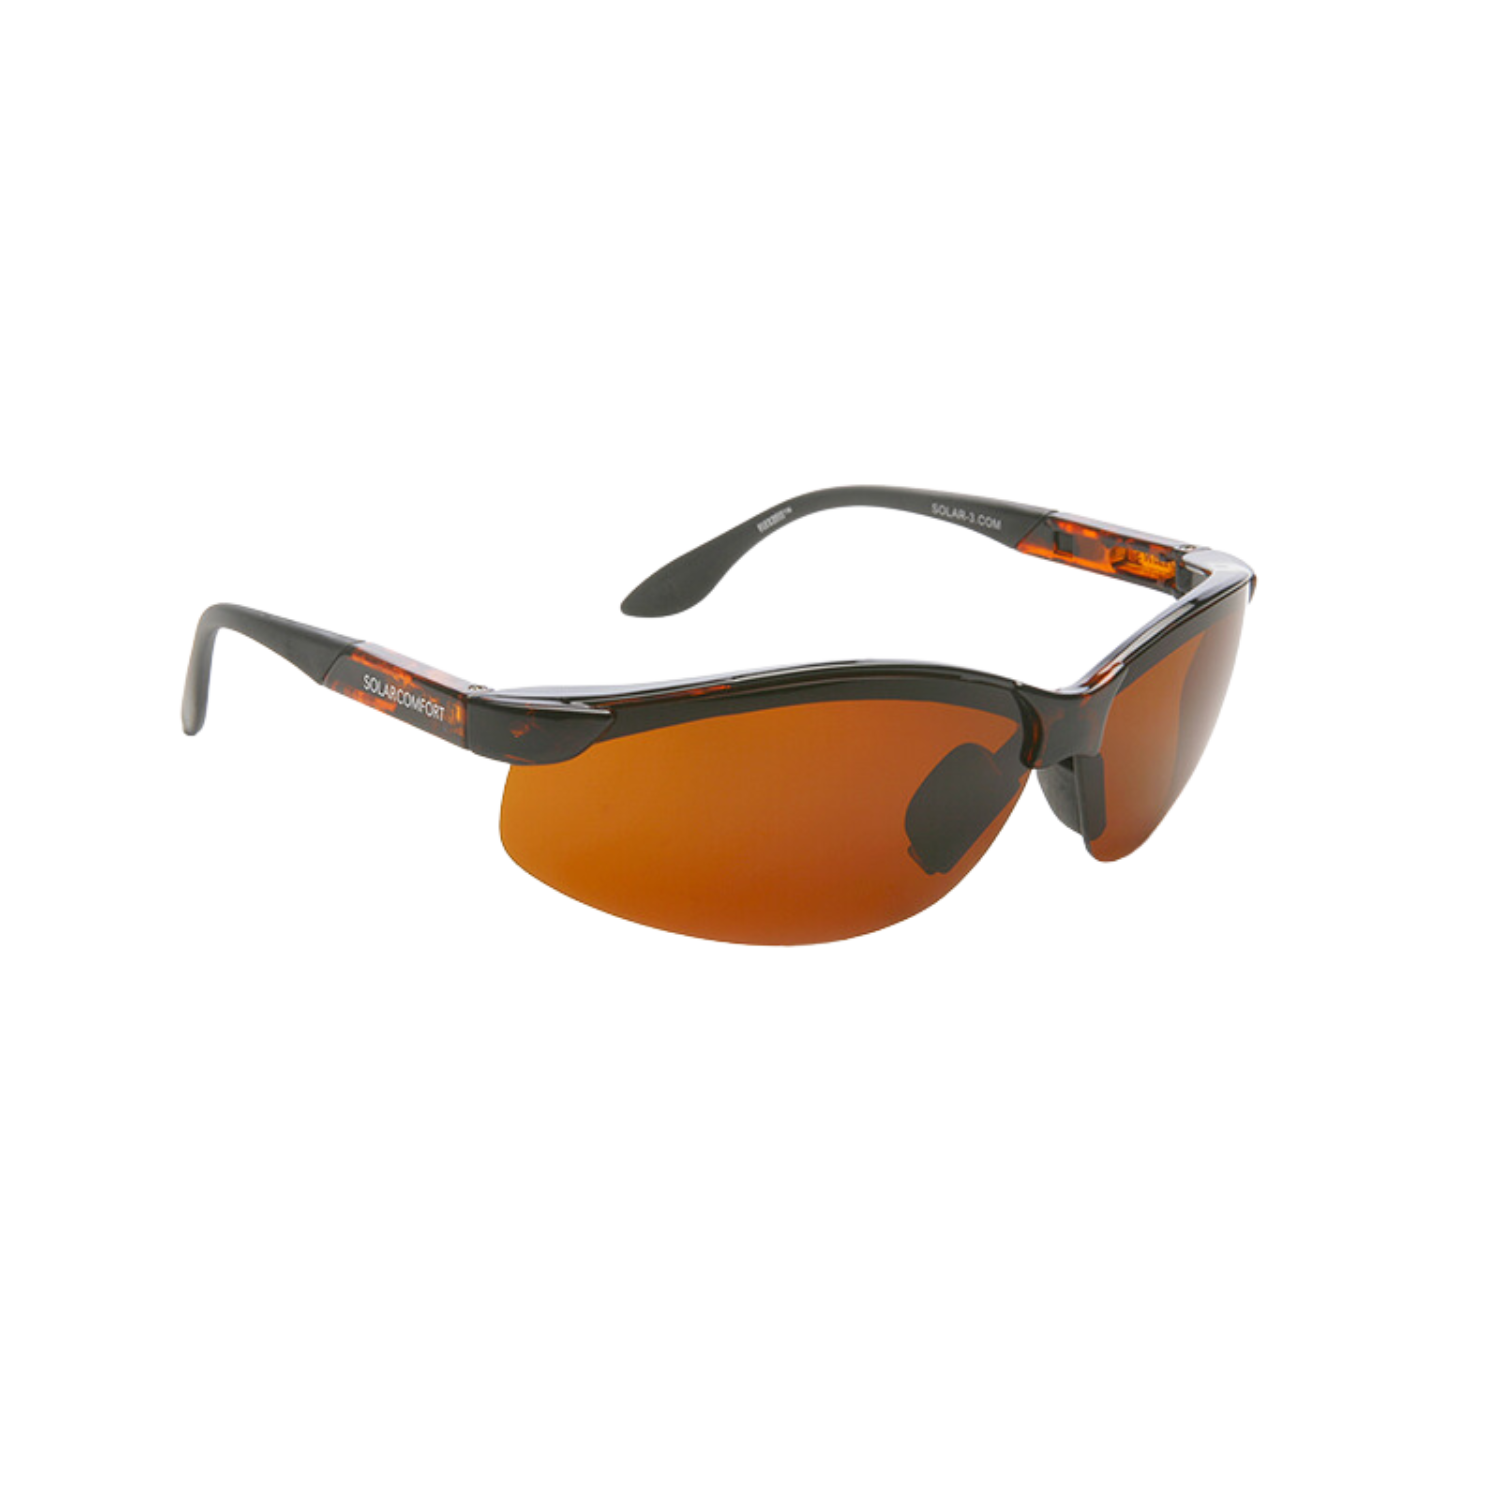 Image of the Eschenbach SolarComfort glare reduction sunglasses with amber tint.